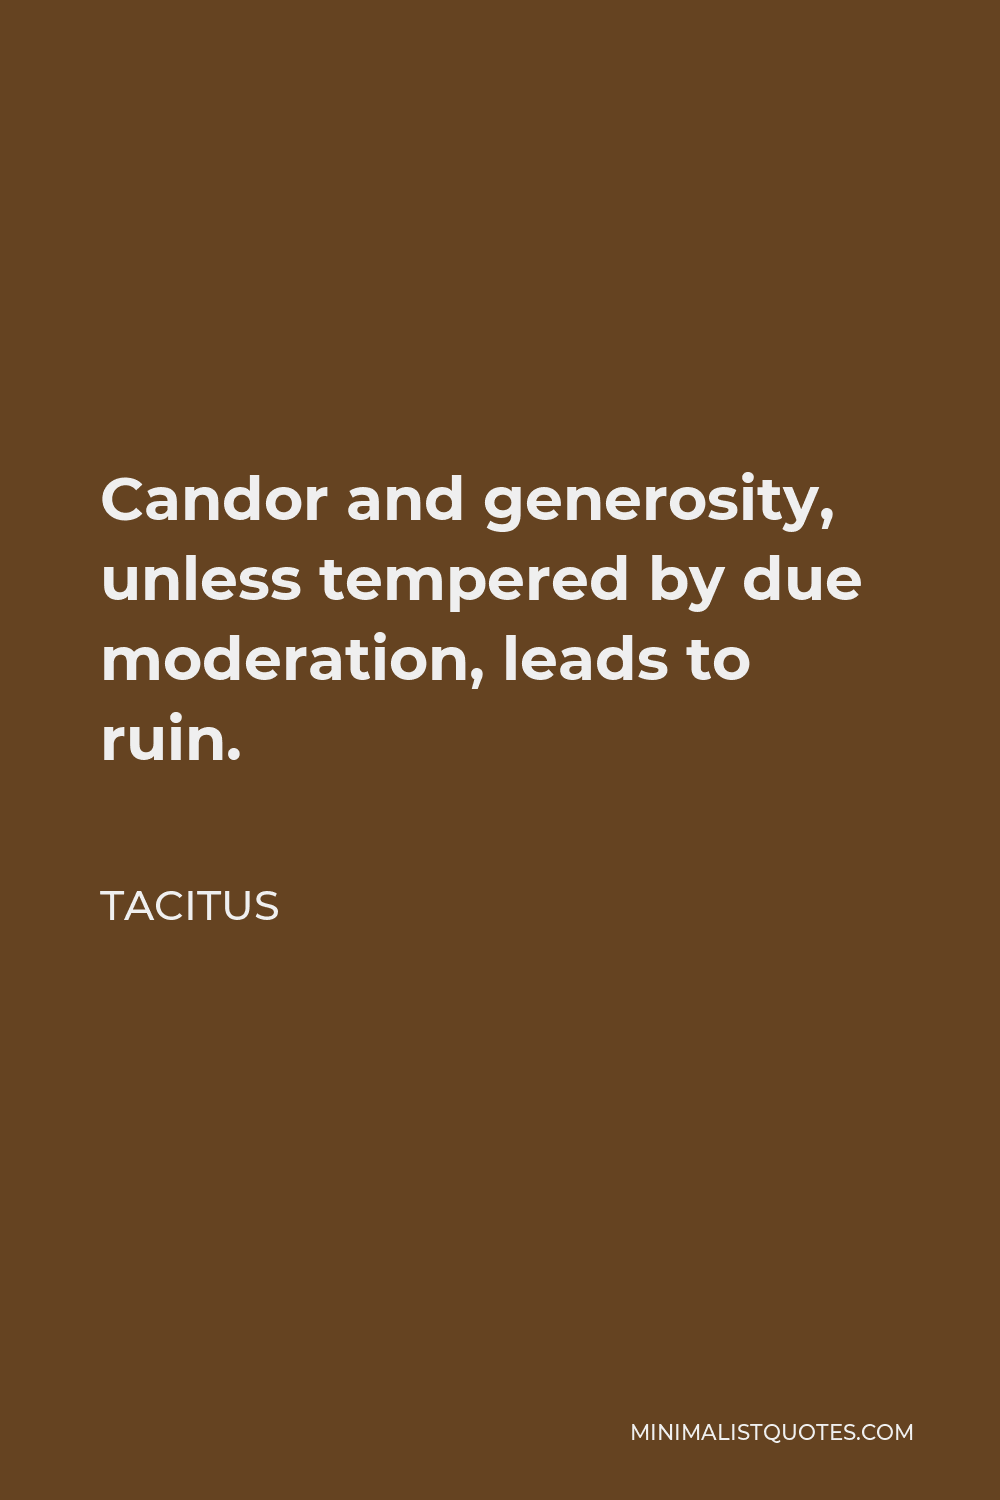 Tacitus Quote - Candor and generosity, unless tempered by due moderation, leads to ruin.